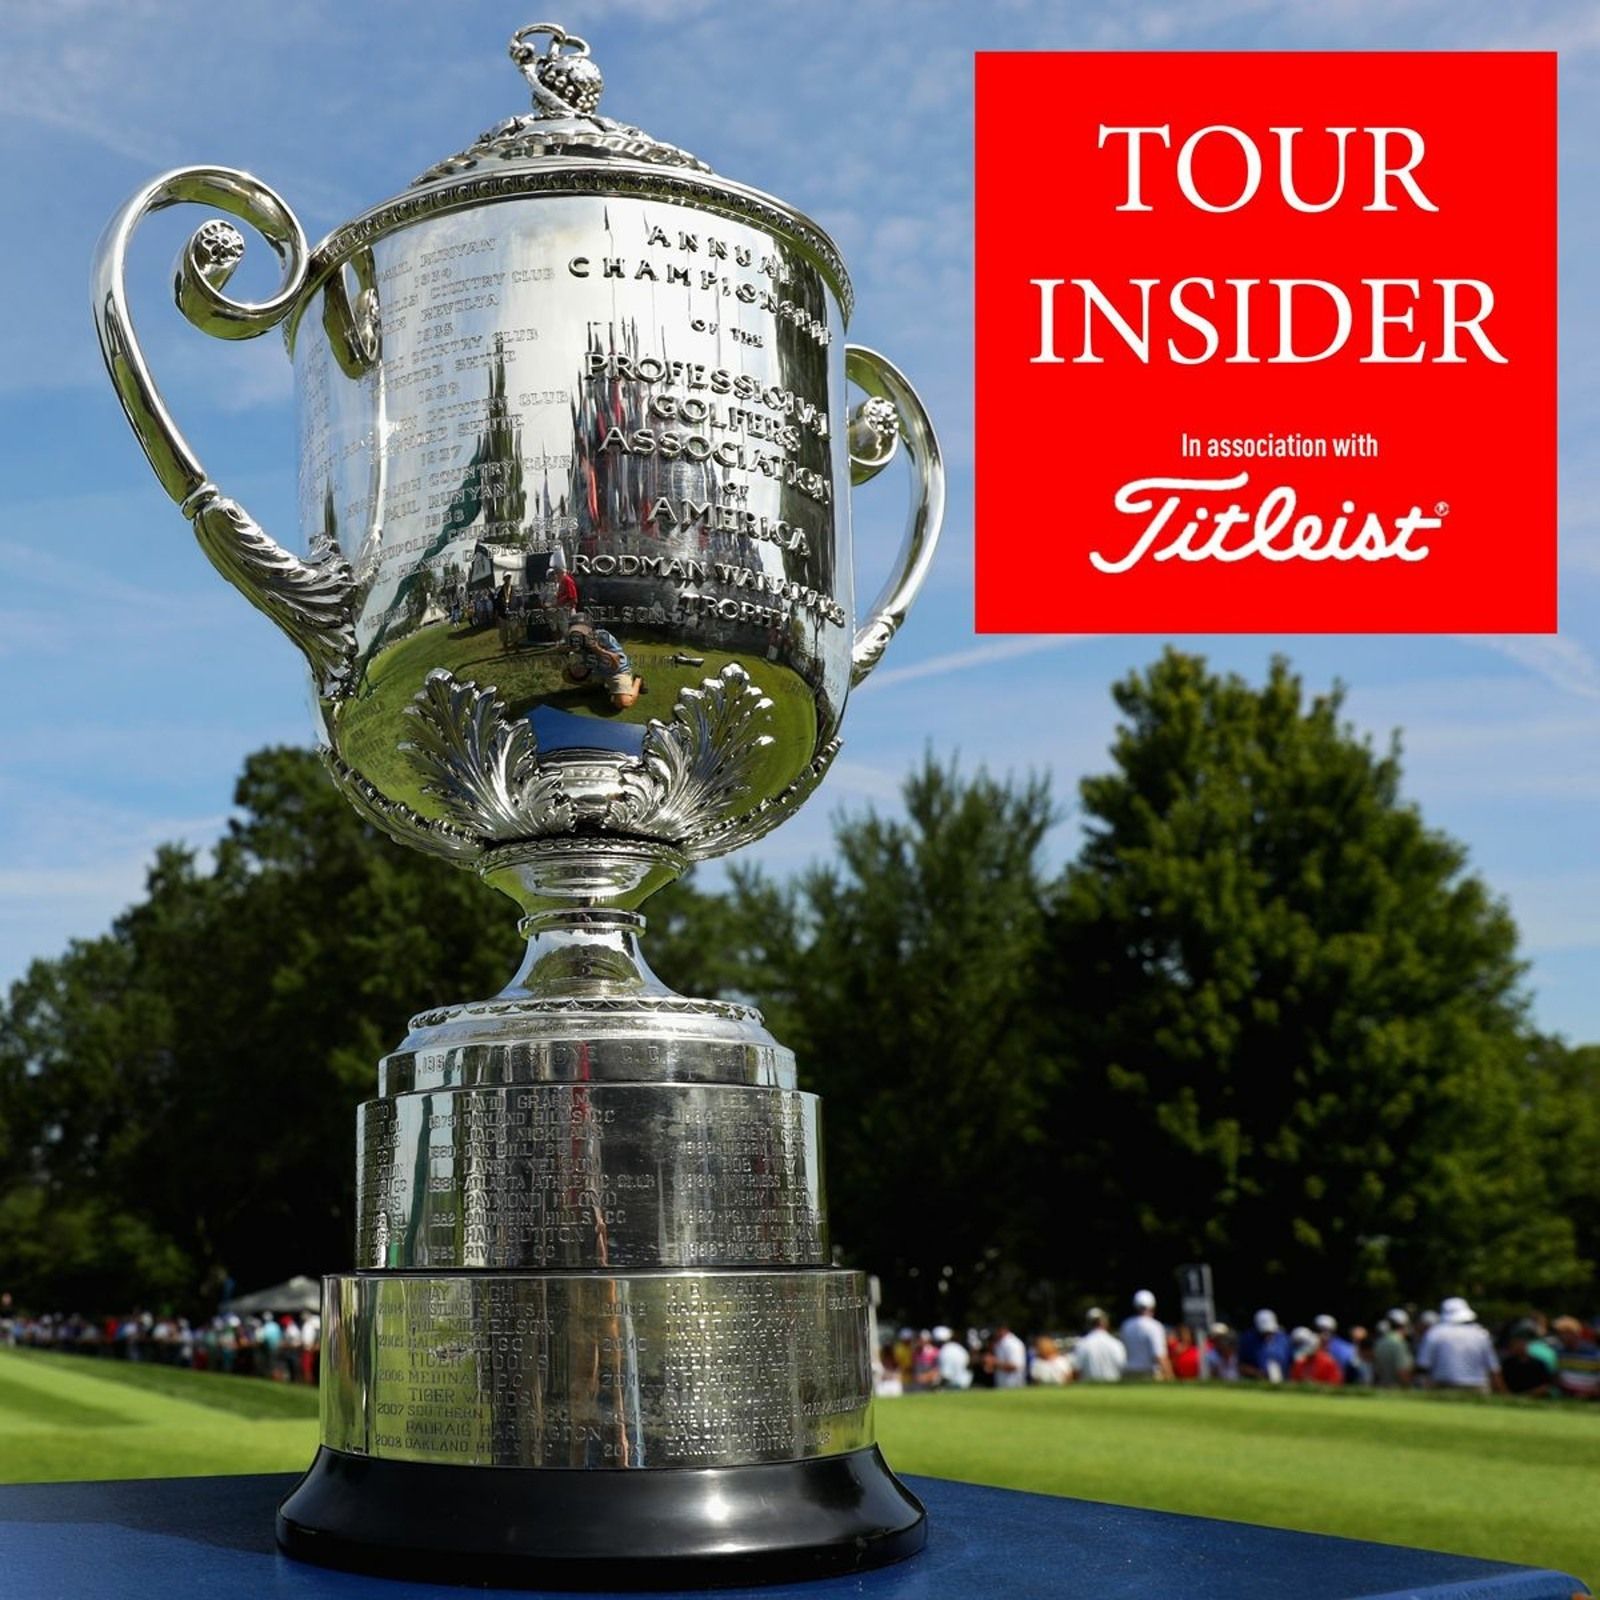 PGA Championship preview and quiz!